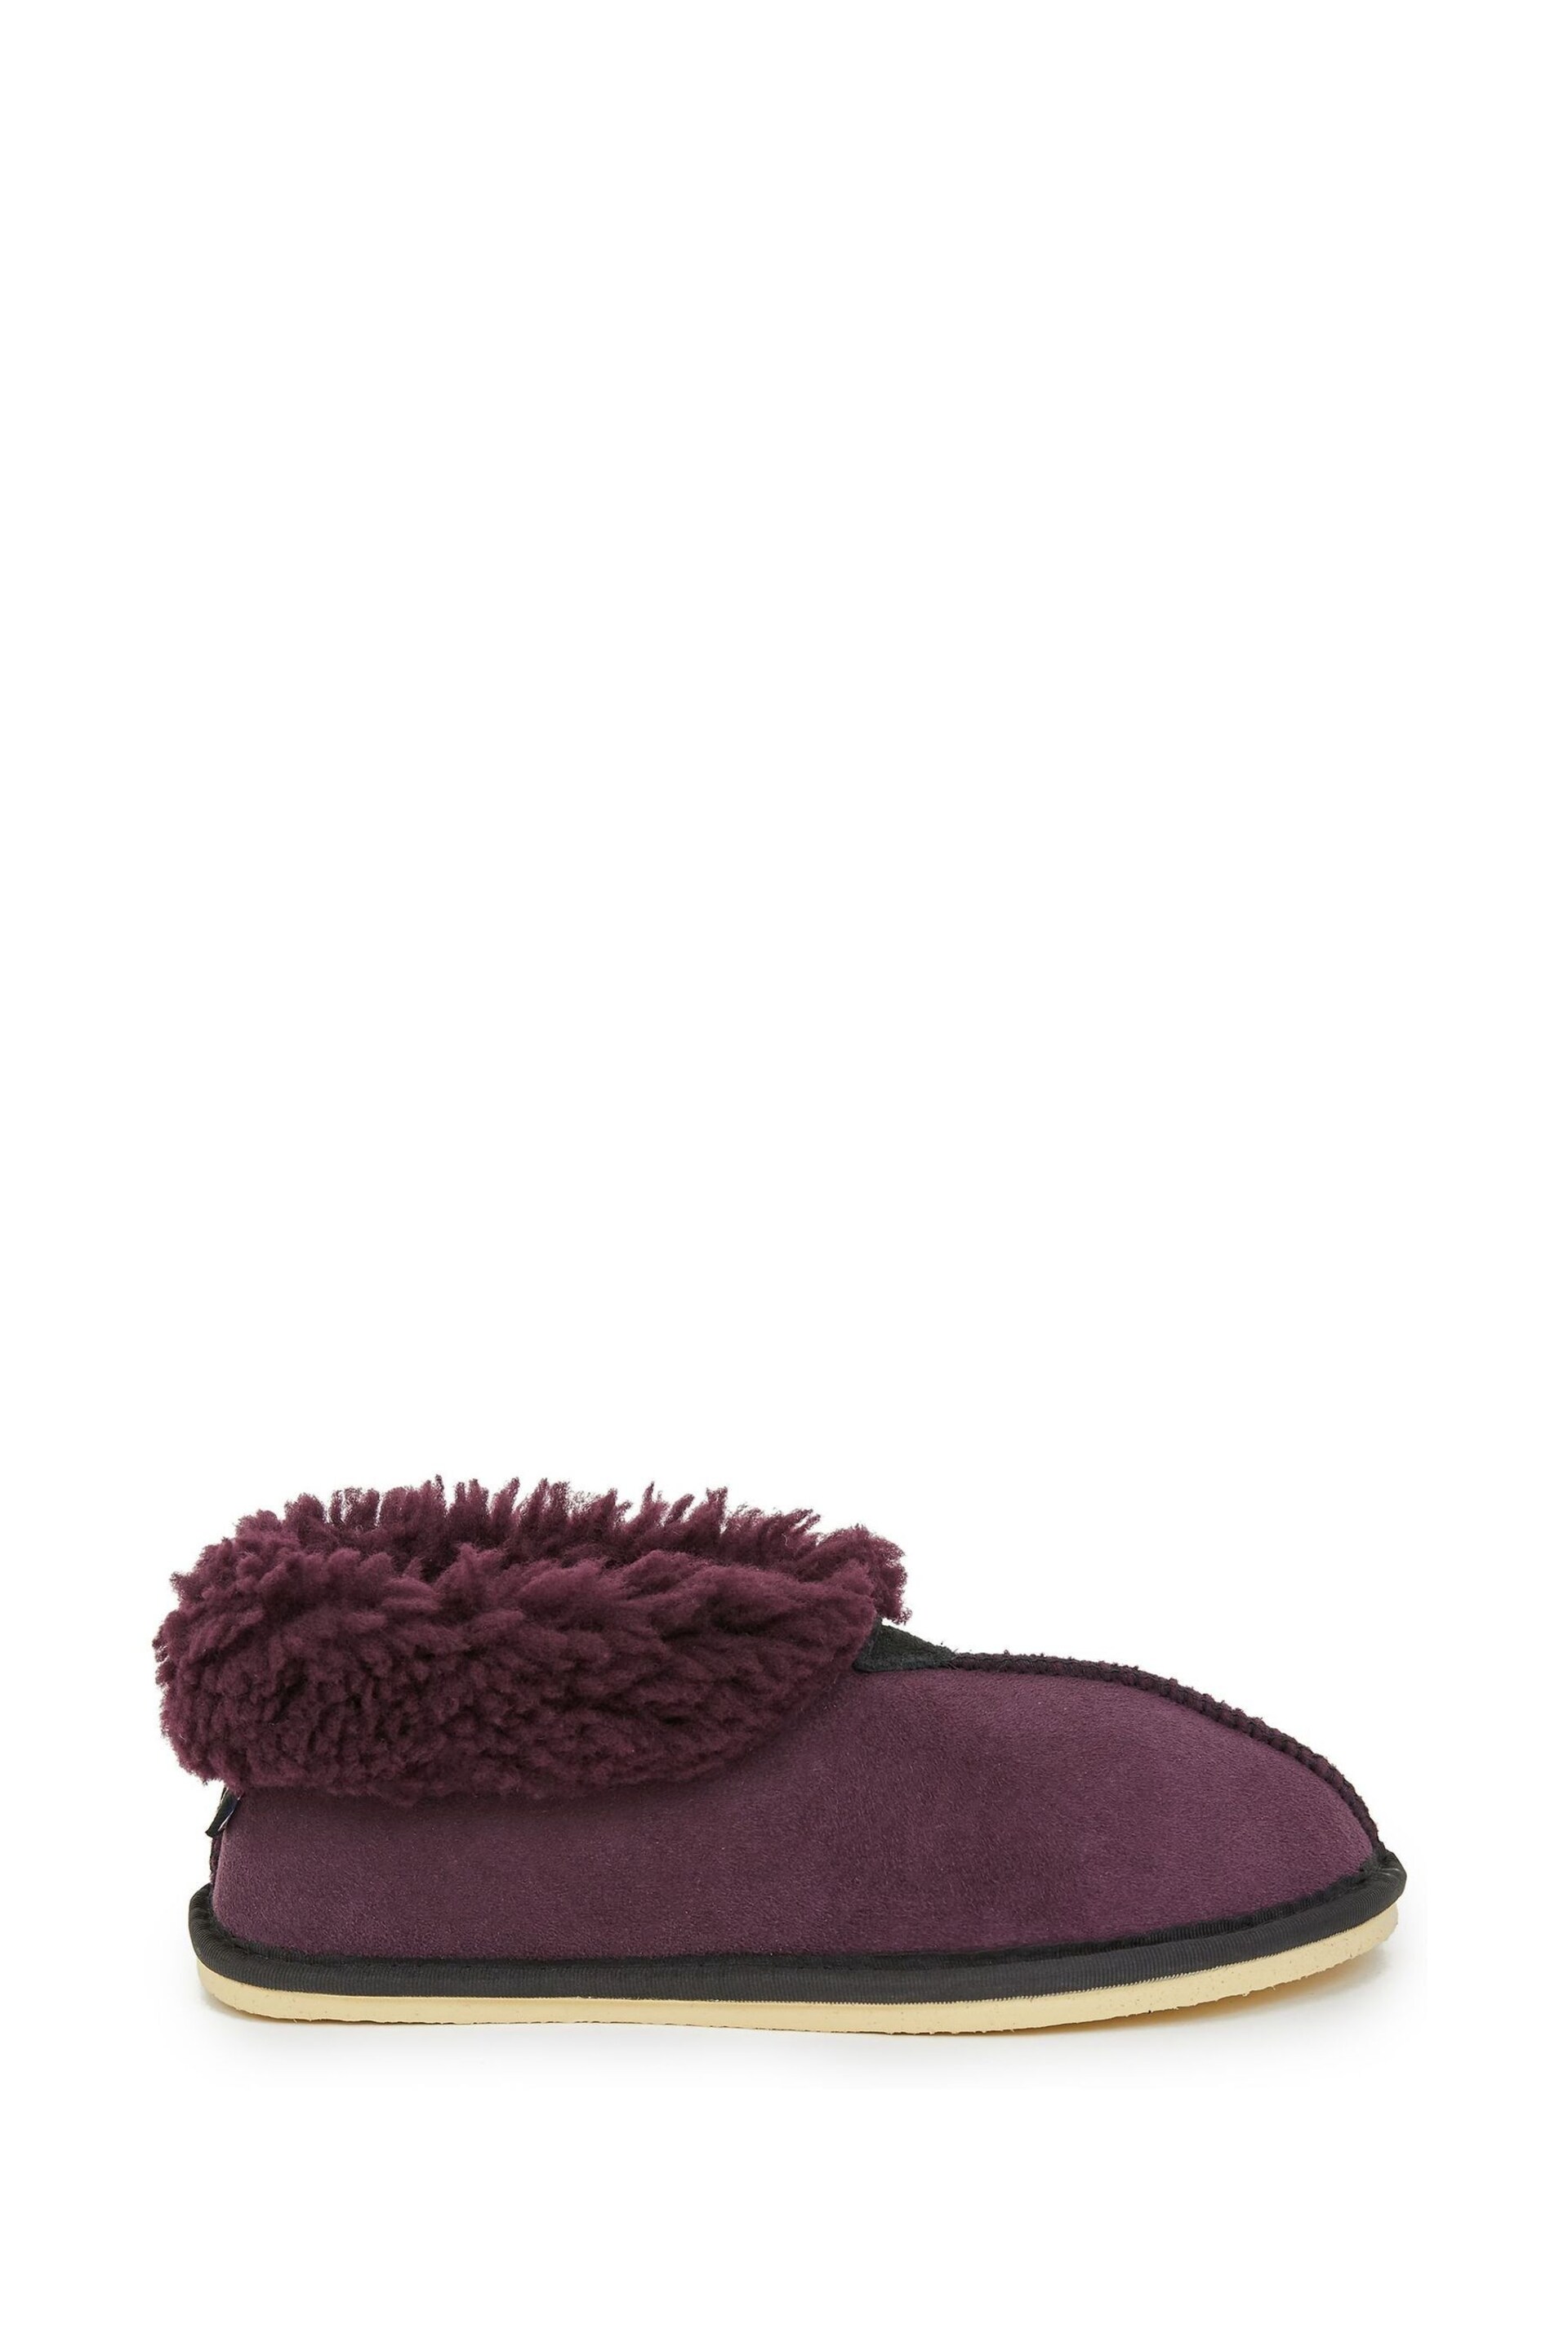 Celtic & Co. Ladies Pink Sheepskin Bootee Slippers - Image 1 of 6